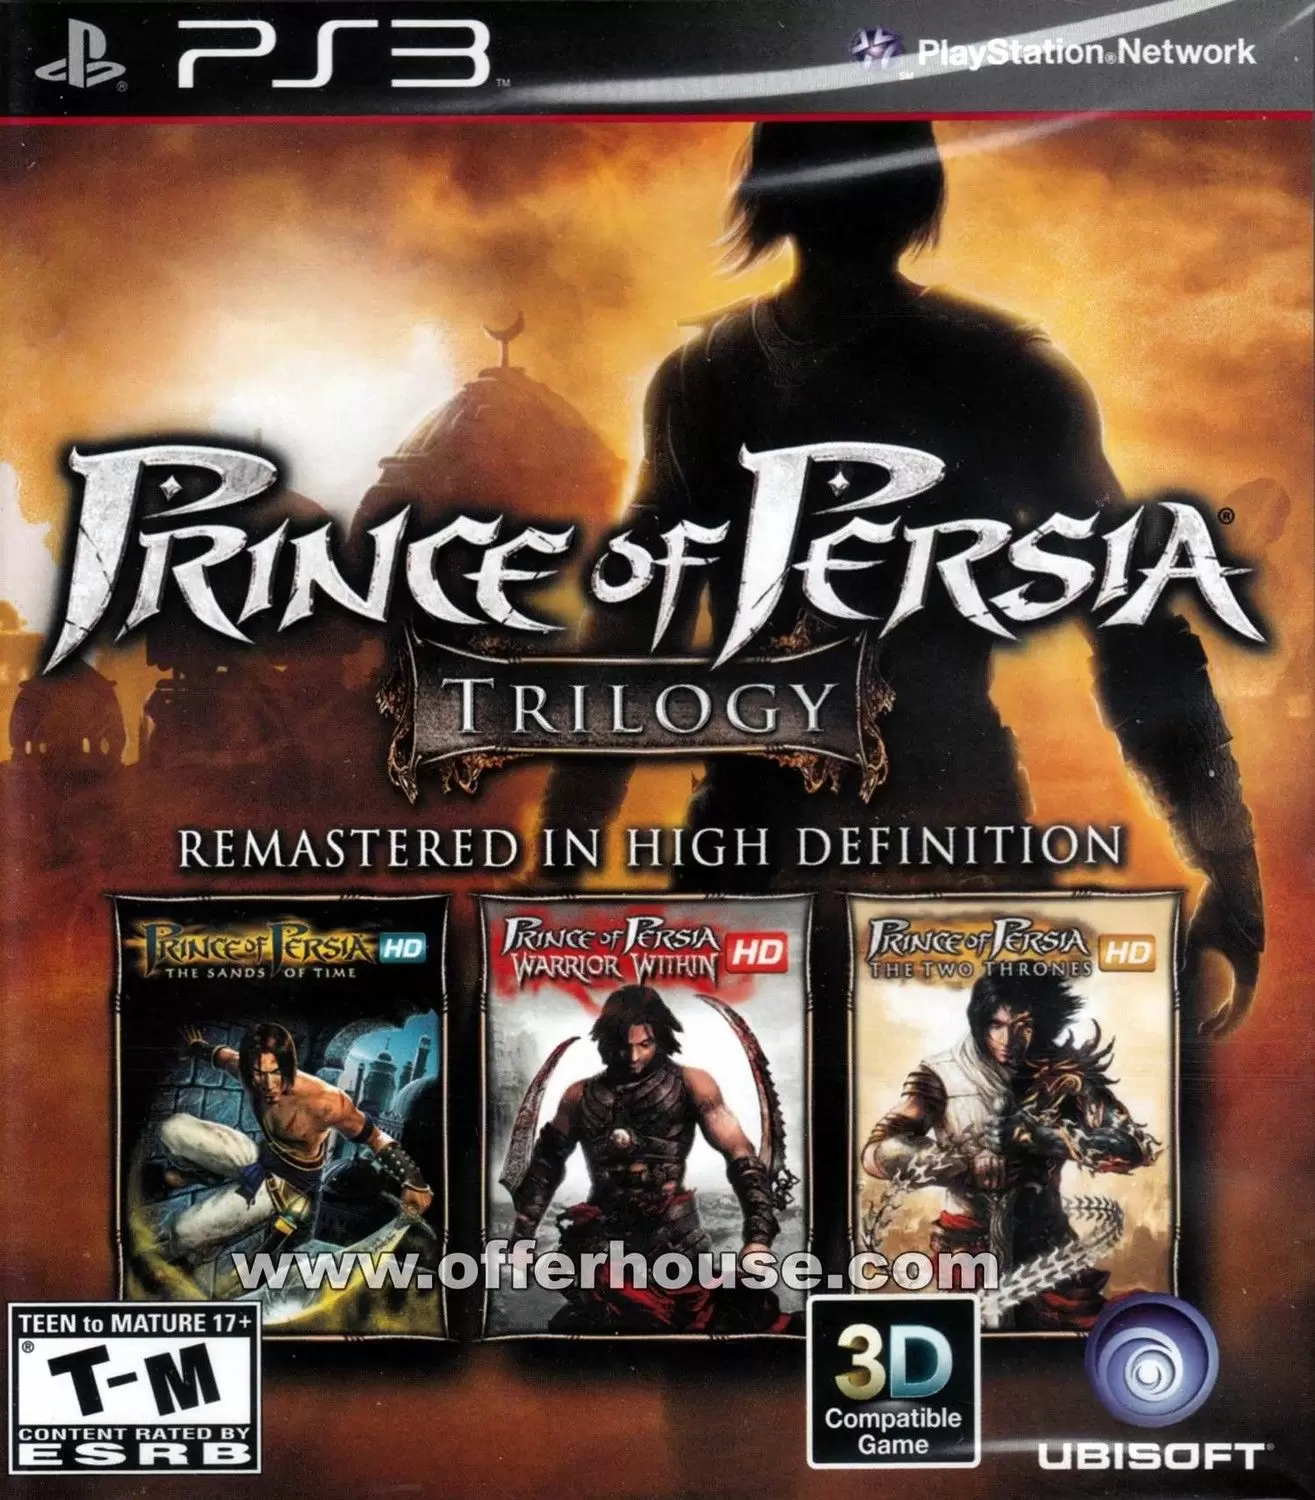 PS3 Games - Prince of Persia Trilogy HD